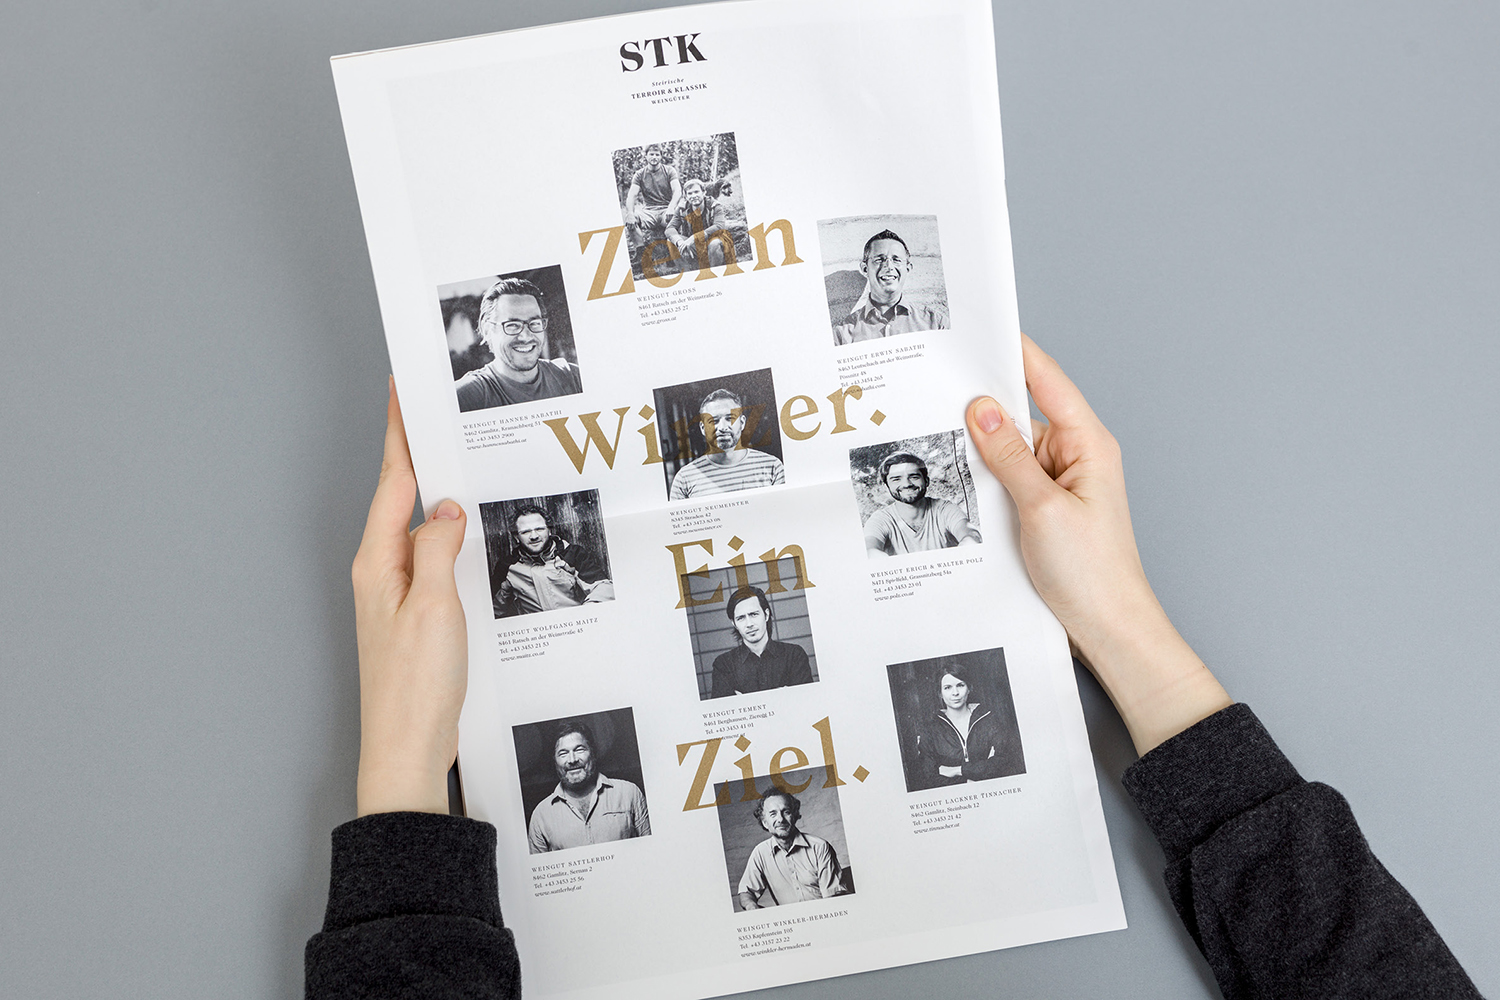 Annual magazine design by Austrian studio Moodley for Steirische Terrior und Klassikweingüter, a the winemaking assocatiation of Austria's Southern and South-Eastern Styria region